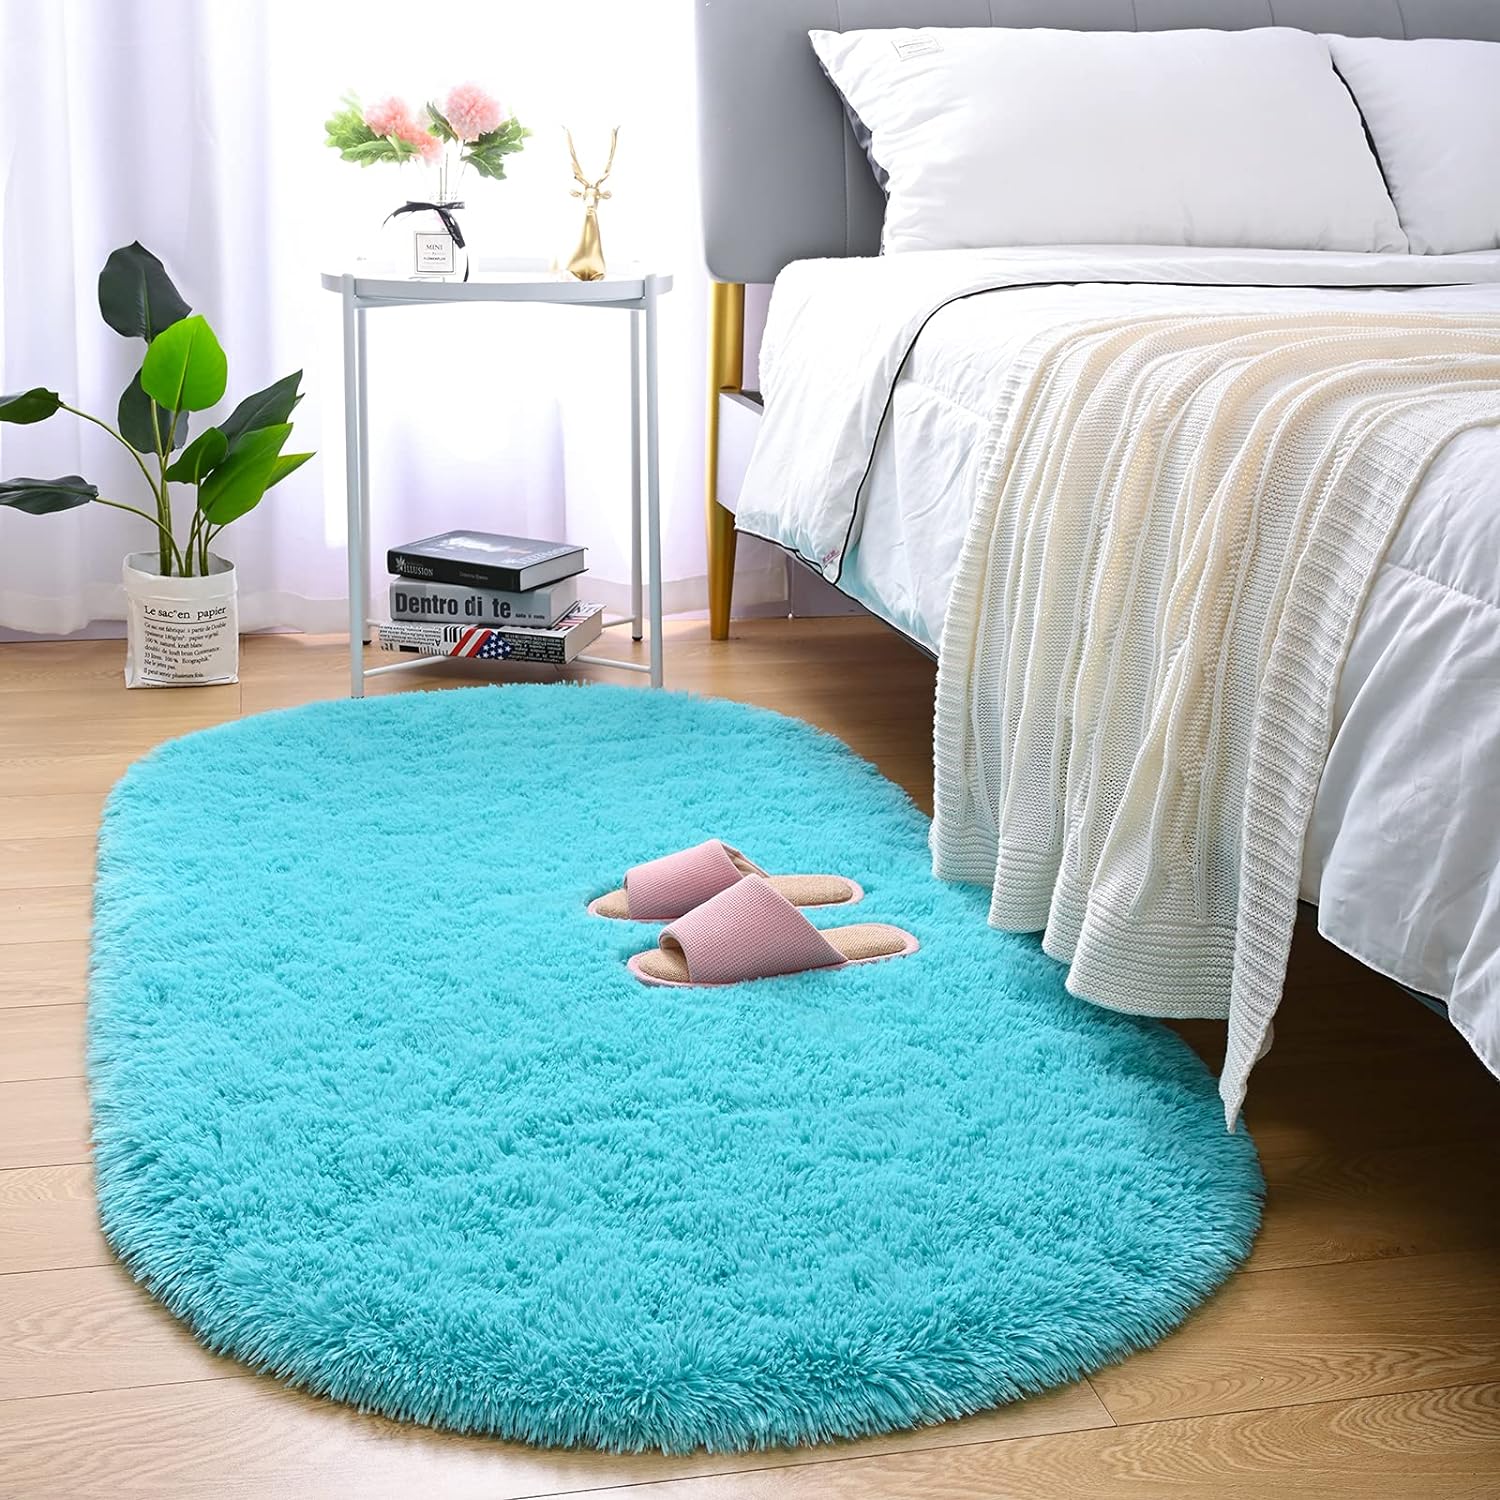 Merelax Soft Shaggy Rug for Kids Bedroom, Oval 2.6'x5.3' Teal Plush Fluffy Carpets for Living Room, Furry Carpet for Teen Girls Room, Anti-Skid Fuzzy Comfy Rug for Nursery Decor Cute Baby Play Mat